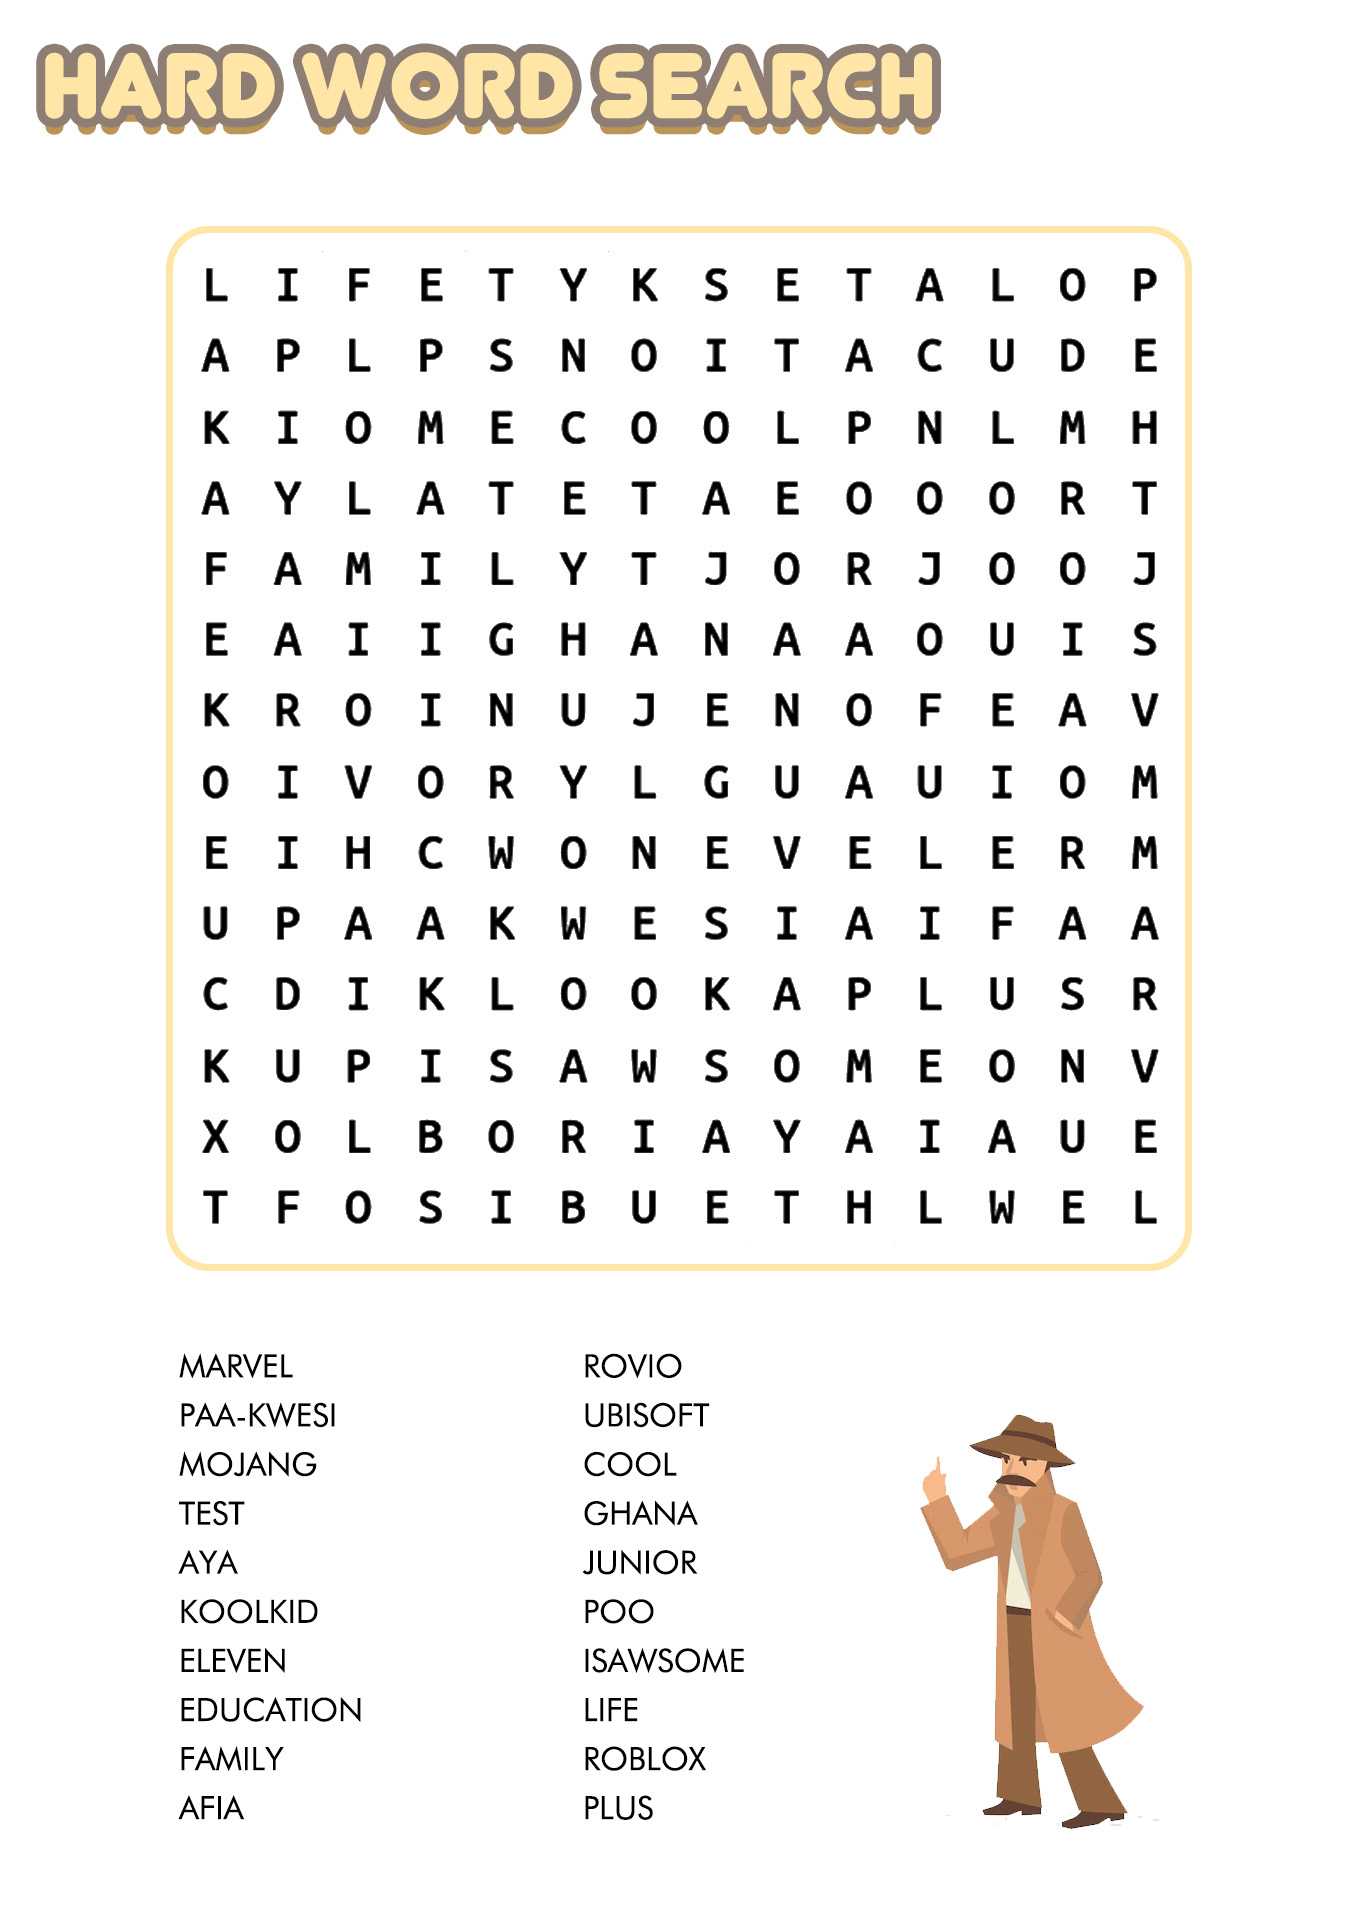 10-best-images-of-adult-word-search-puzzles-worksheets-difficult